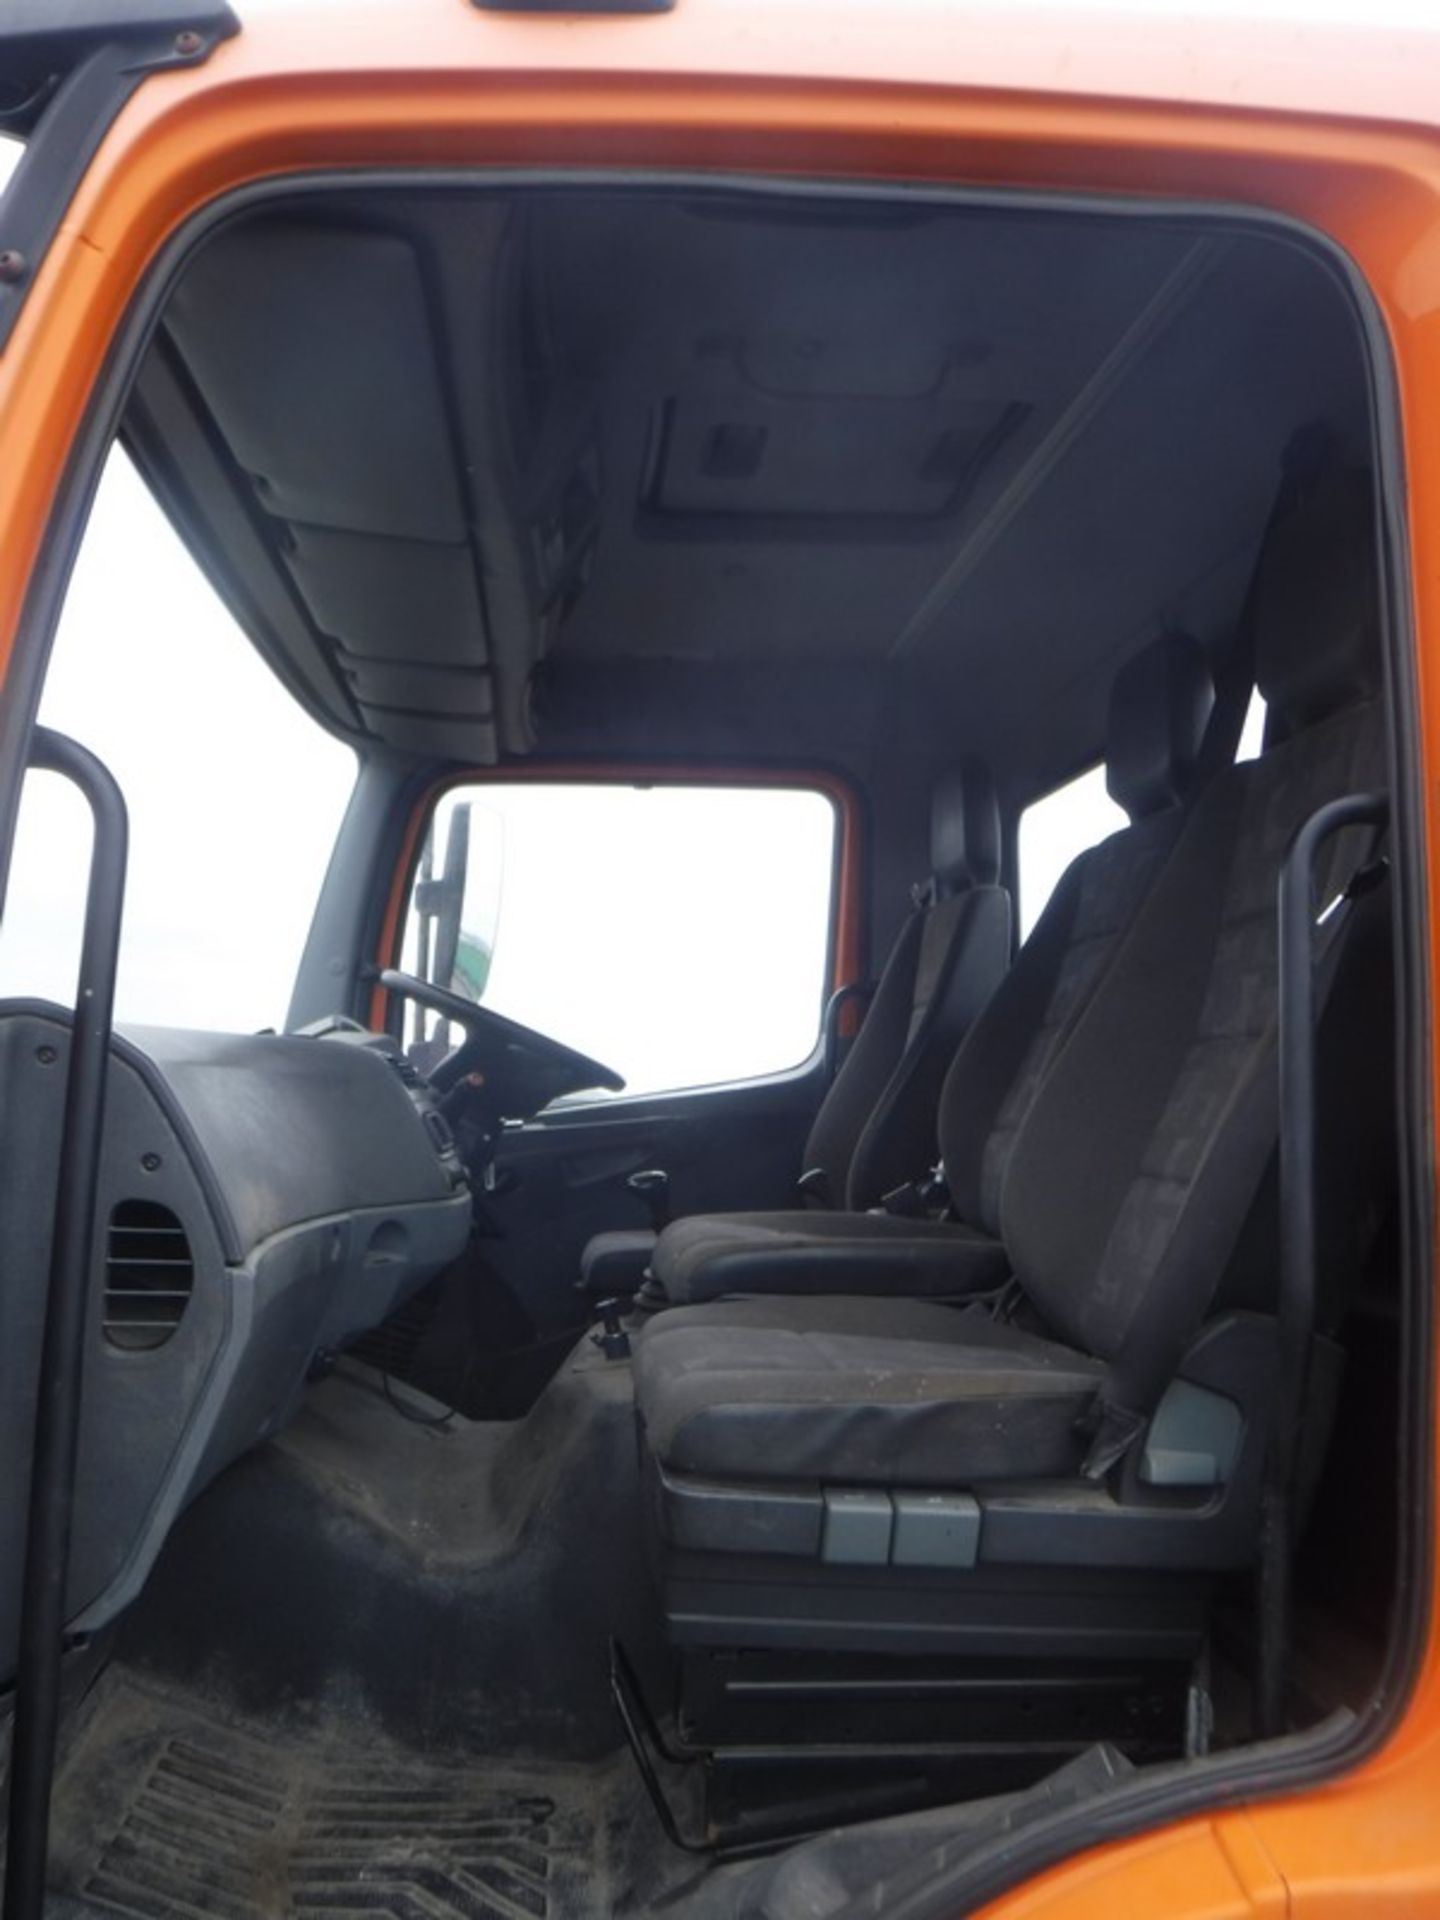 MERCEDES ATEGO - 1324A - Image 4 of 18